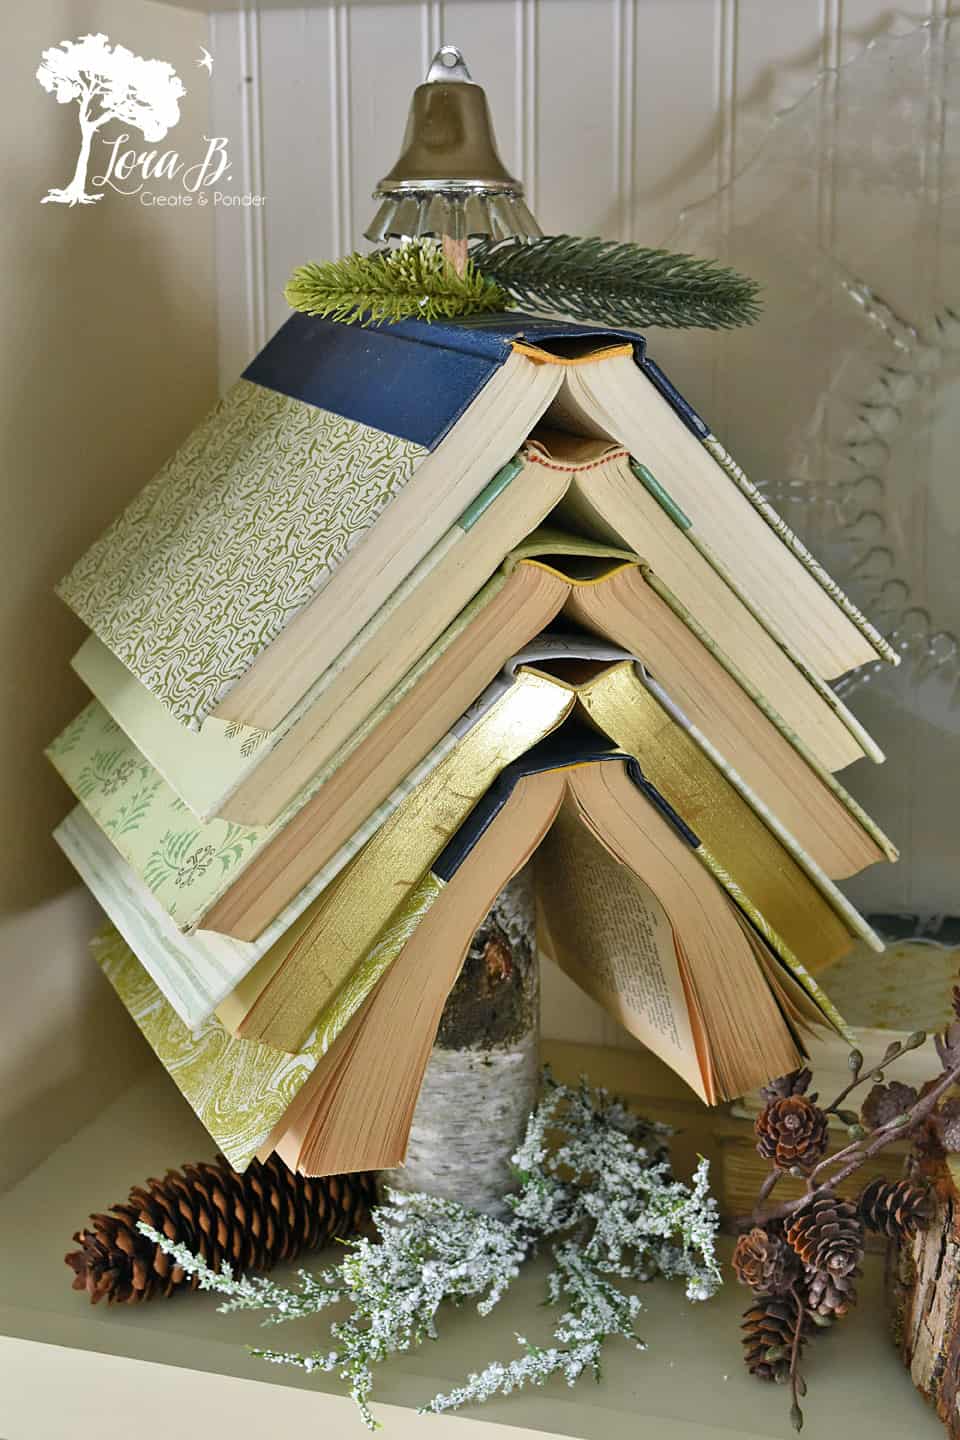 Book trees